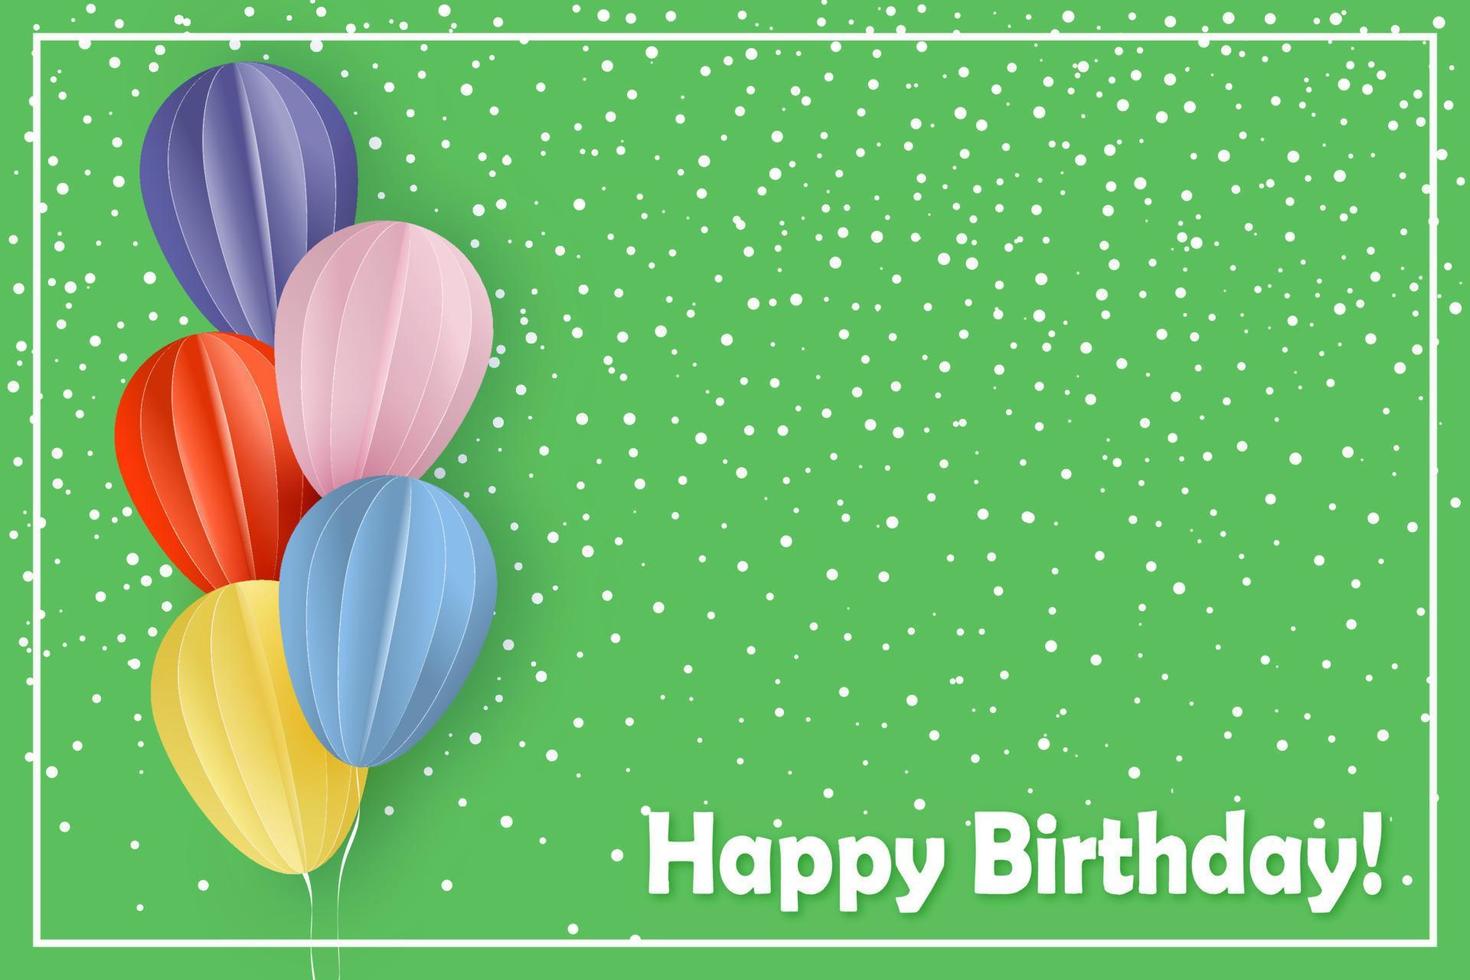 Happy Birthday. Paper cut style greeting card. vector